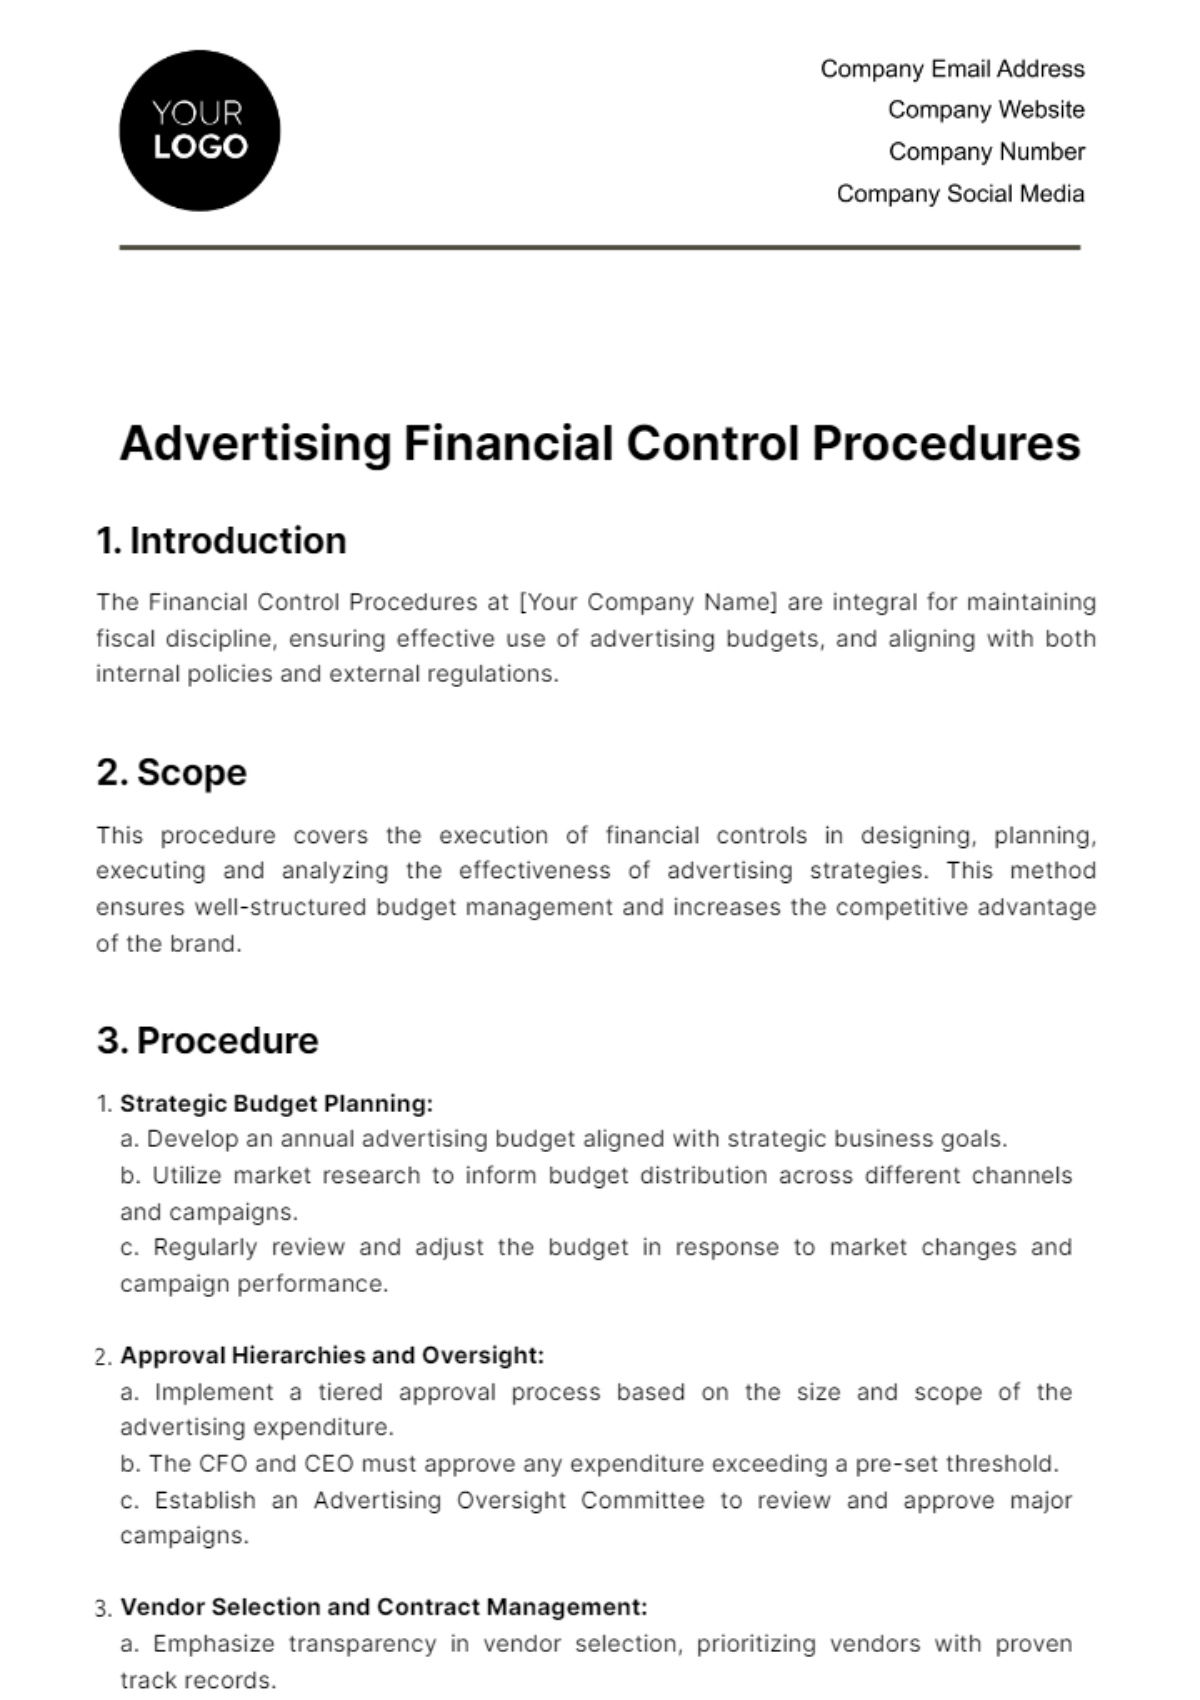 Free Advertising Financial Control Procedures Template